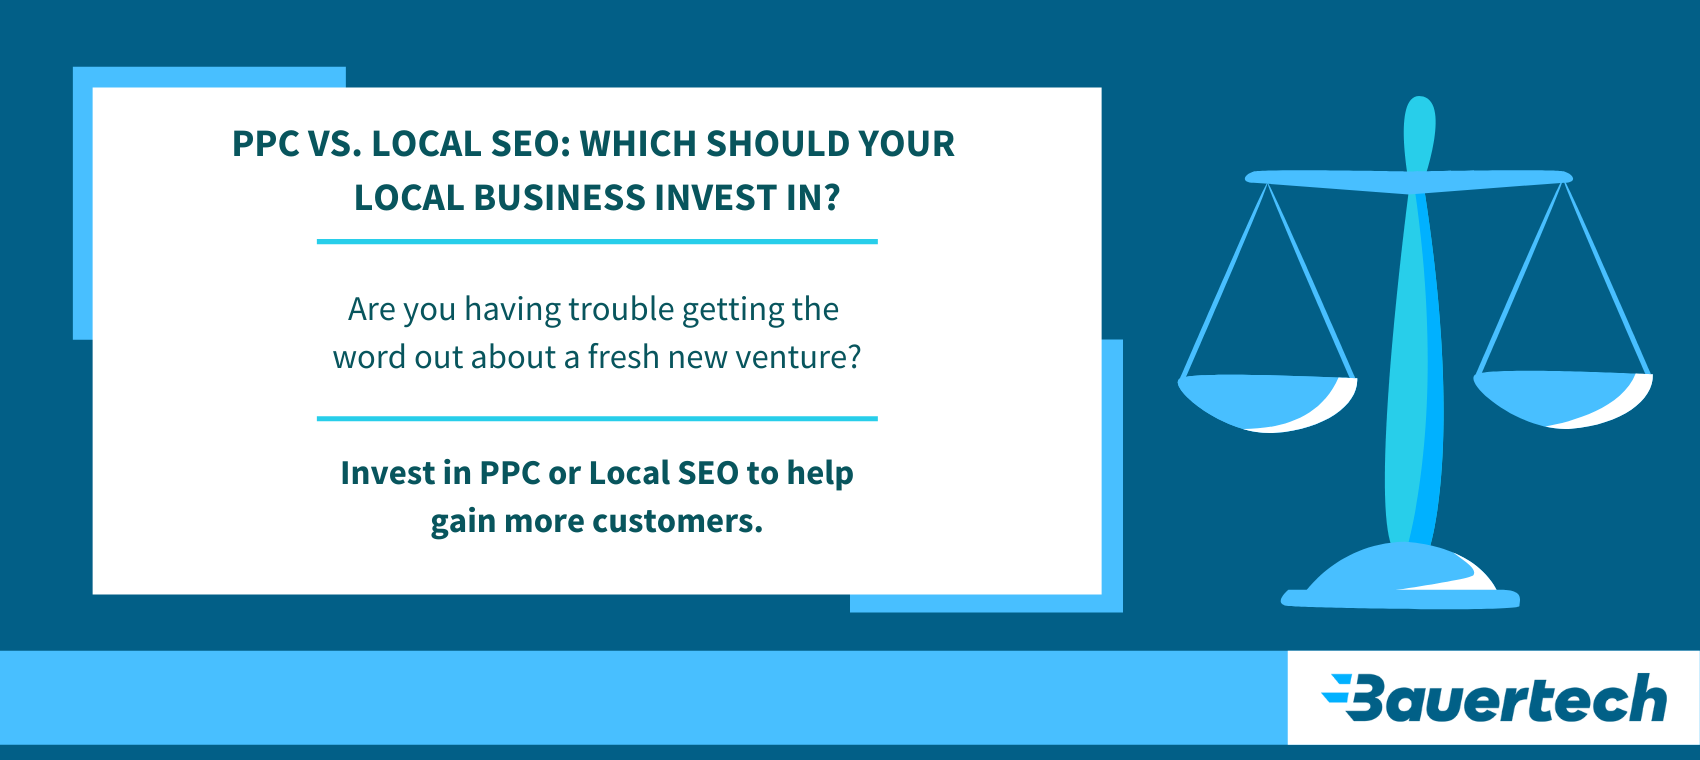 Comparing PPC and Local SEO for Small Local Businesses.